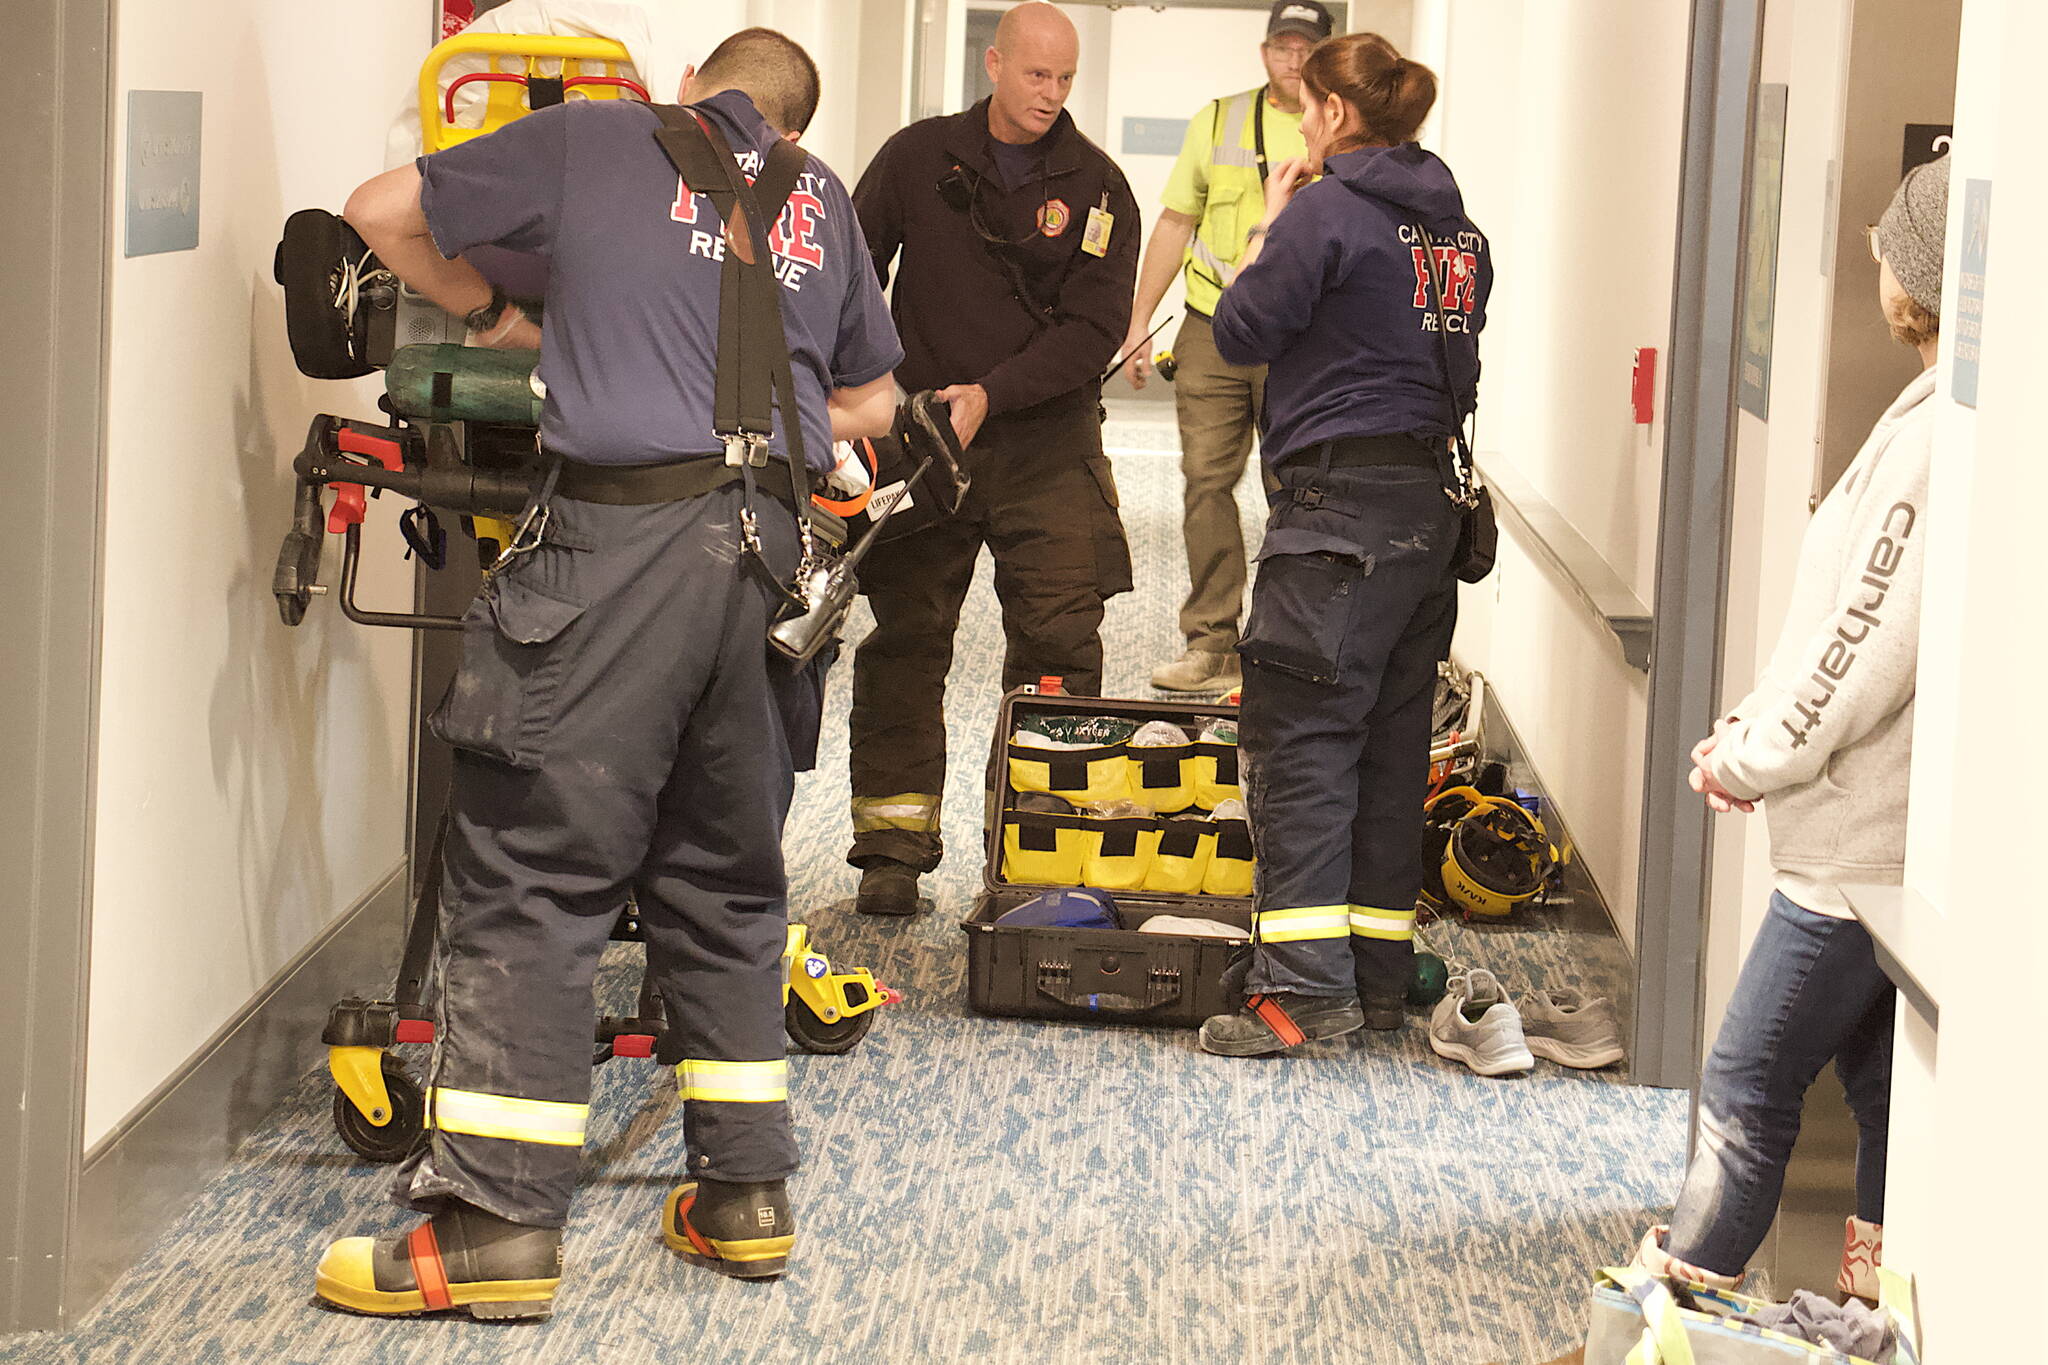 Capital City Fire/Rescue and other workers prepare a stretcher in a hallway of the Riverview Senior Living Center for Nathan Bishop, 58, after he was found late Monday morning in the attic about 40 hours after he was reported missing. (Mark Sabbatini / Juneau Empire)